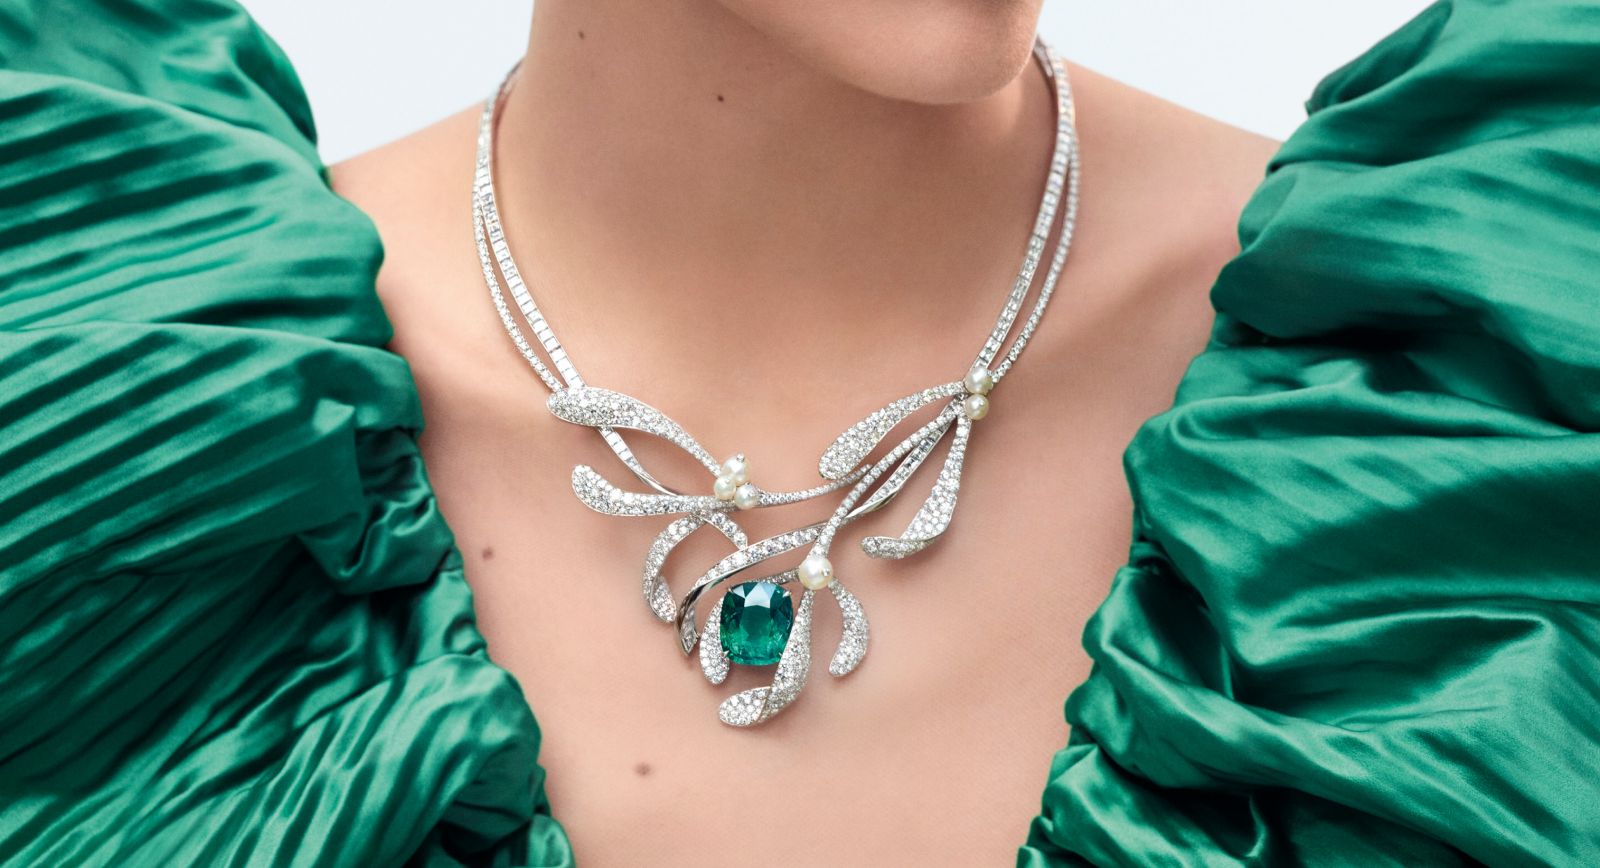 Louis Vuitton's New High Jewelry Collection Is Literally Out of This World